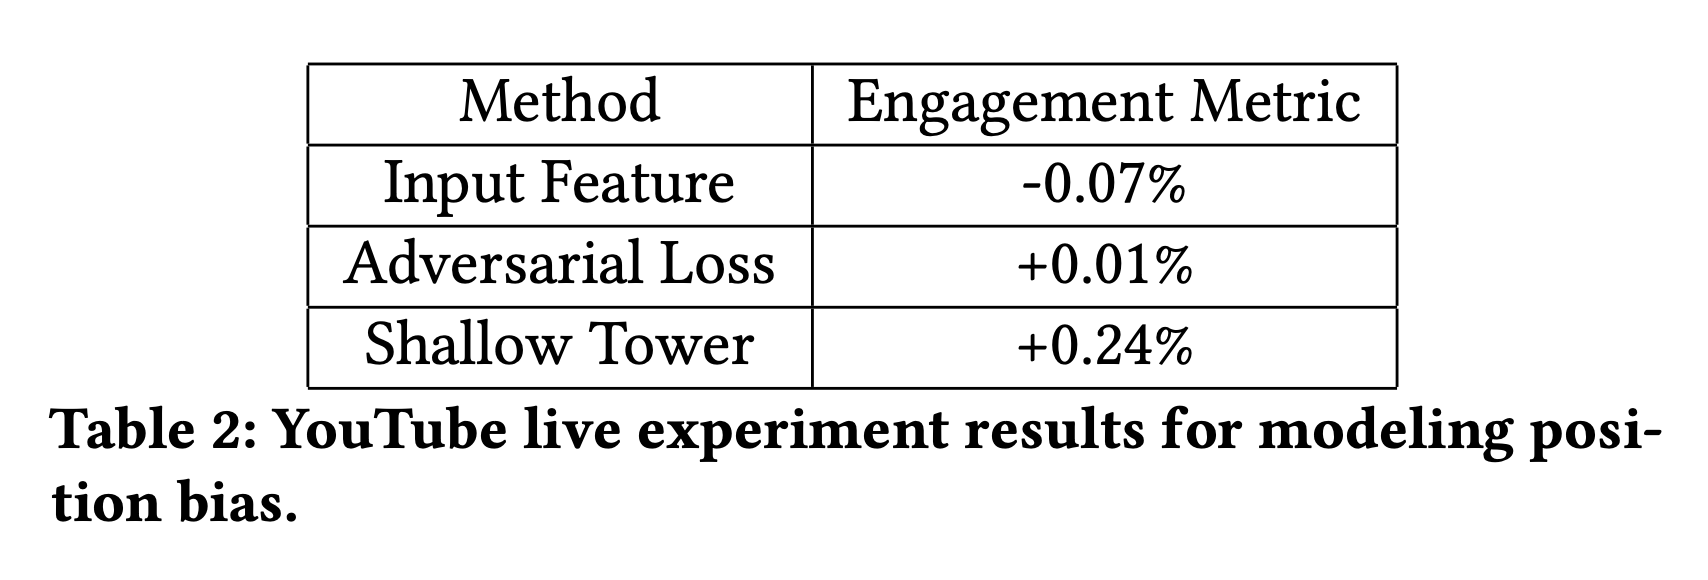 Table 2: YouTube live experiment results for modeling position bias.